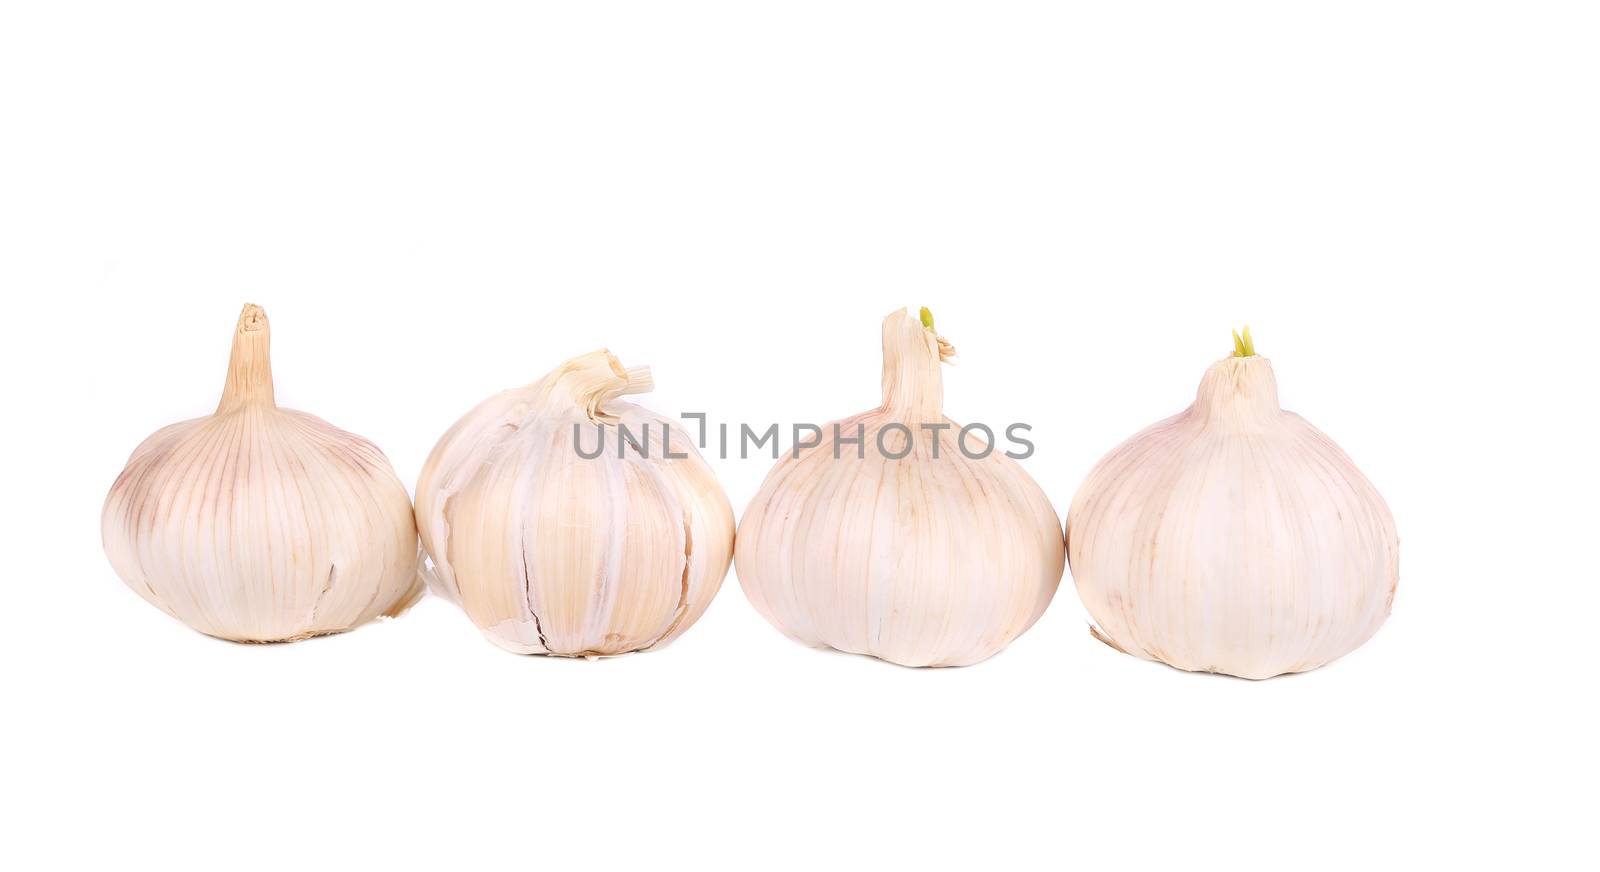 Garlic bulbs. Isolated on a white background.